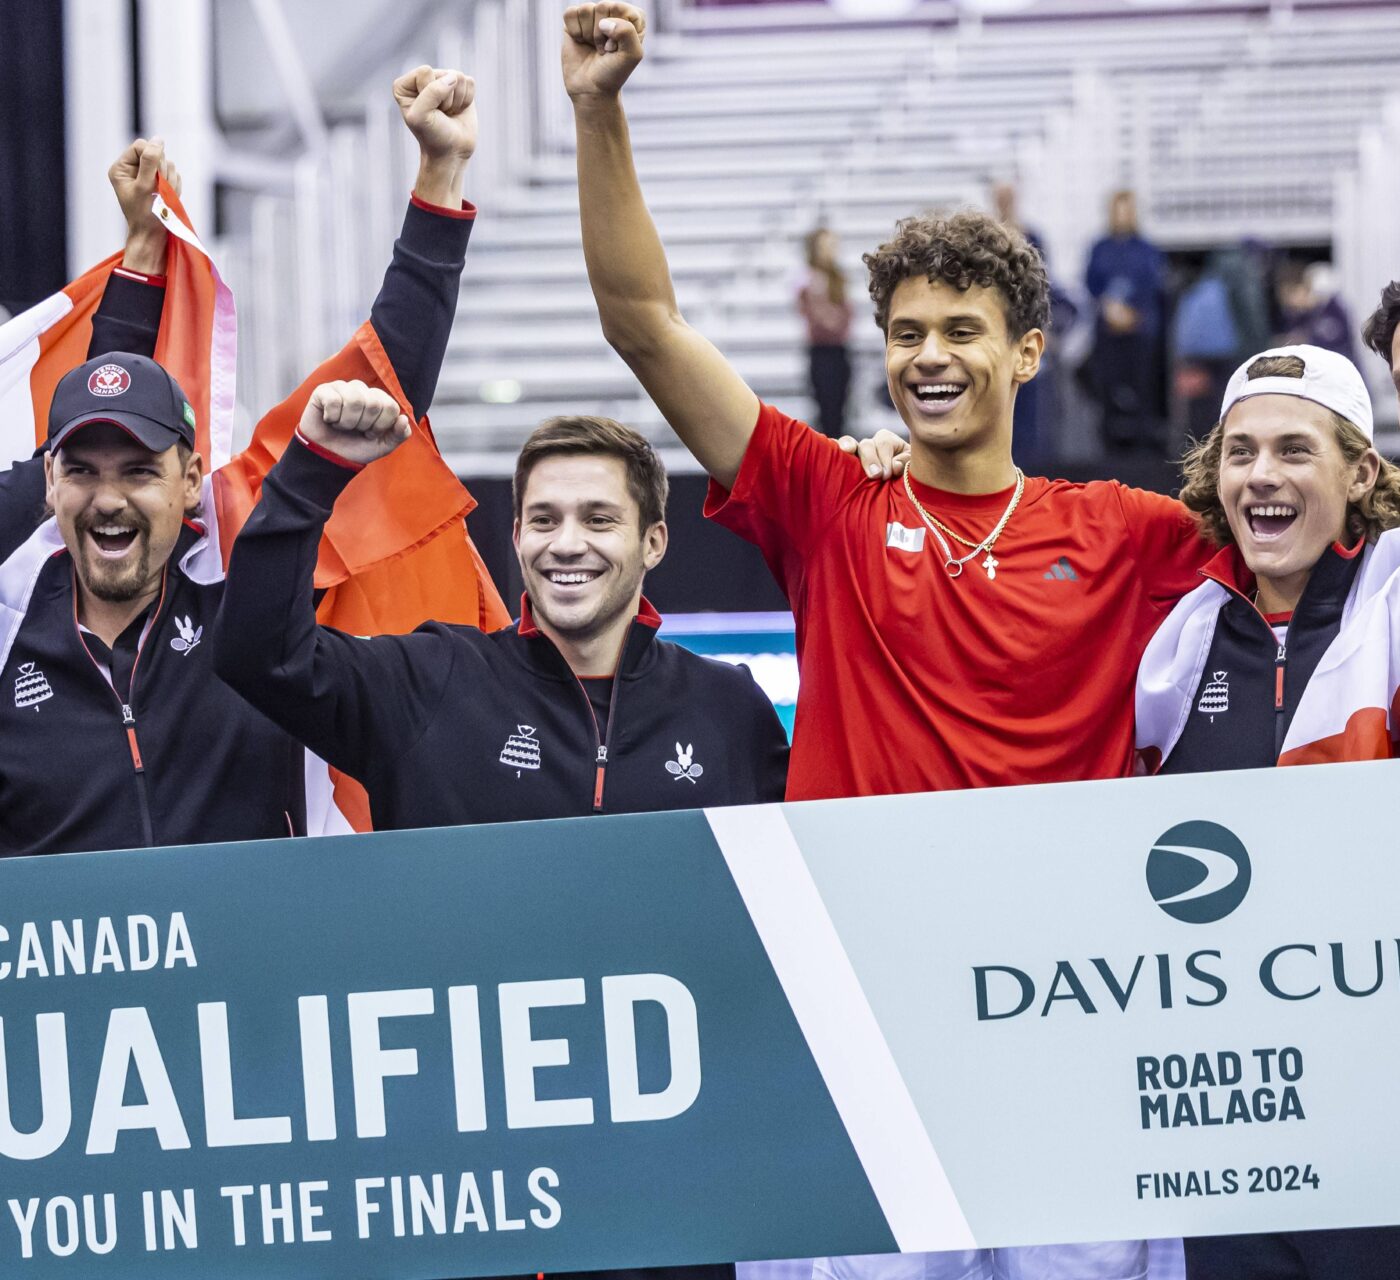 From left to right, Casek Pospisil, Frank Dancevic, Alexis Galarneau, Gabriel Diallo, Liam Draxl, and Milos Raonic celebrate the Davis Cup win for Team Canada in Montreal.